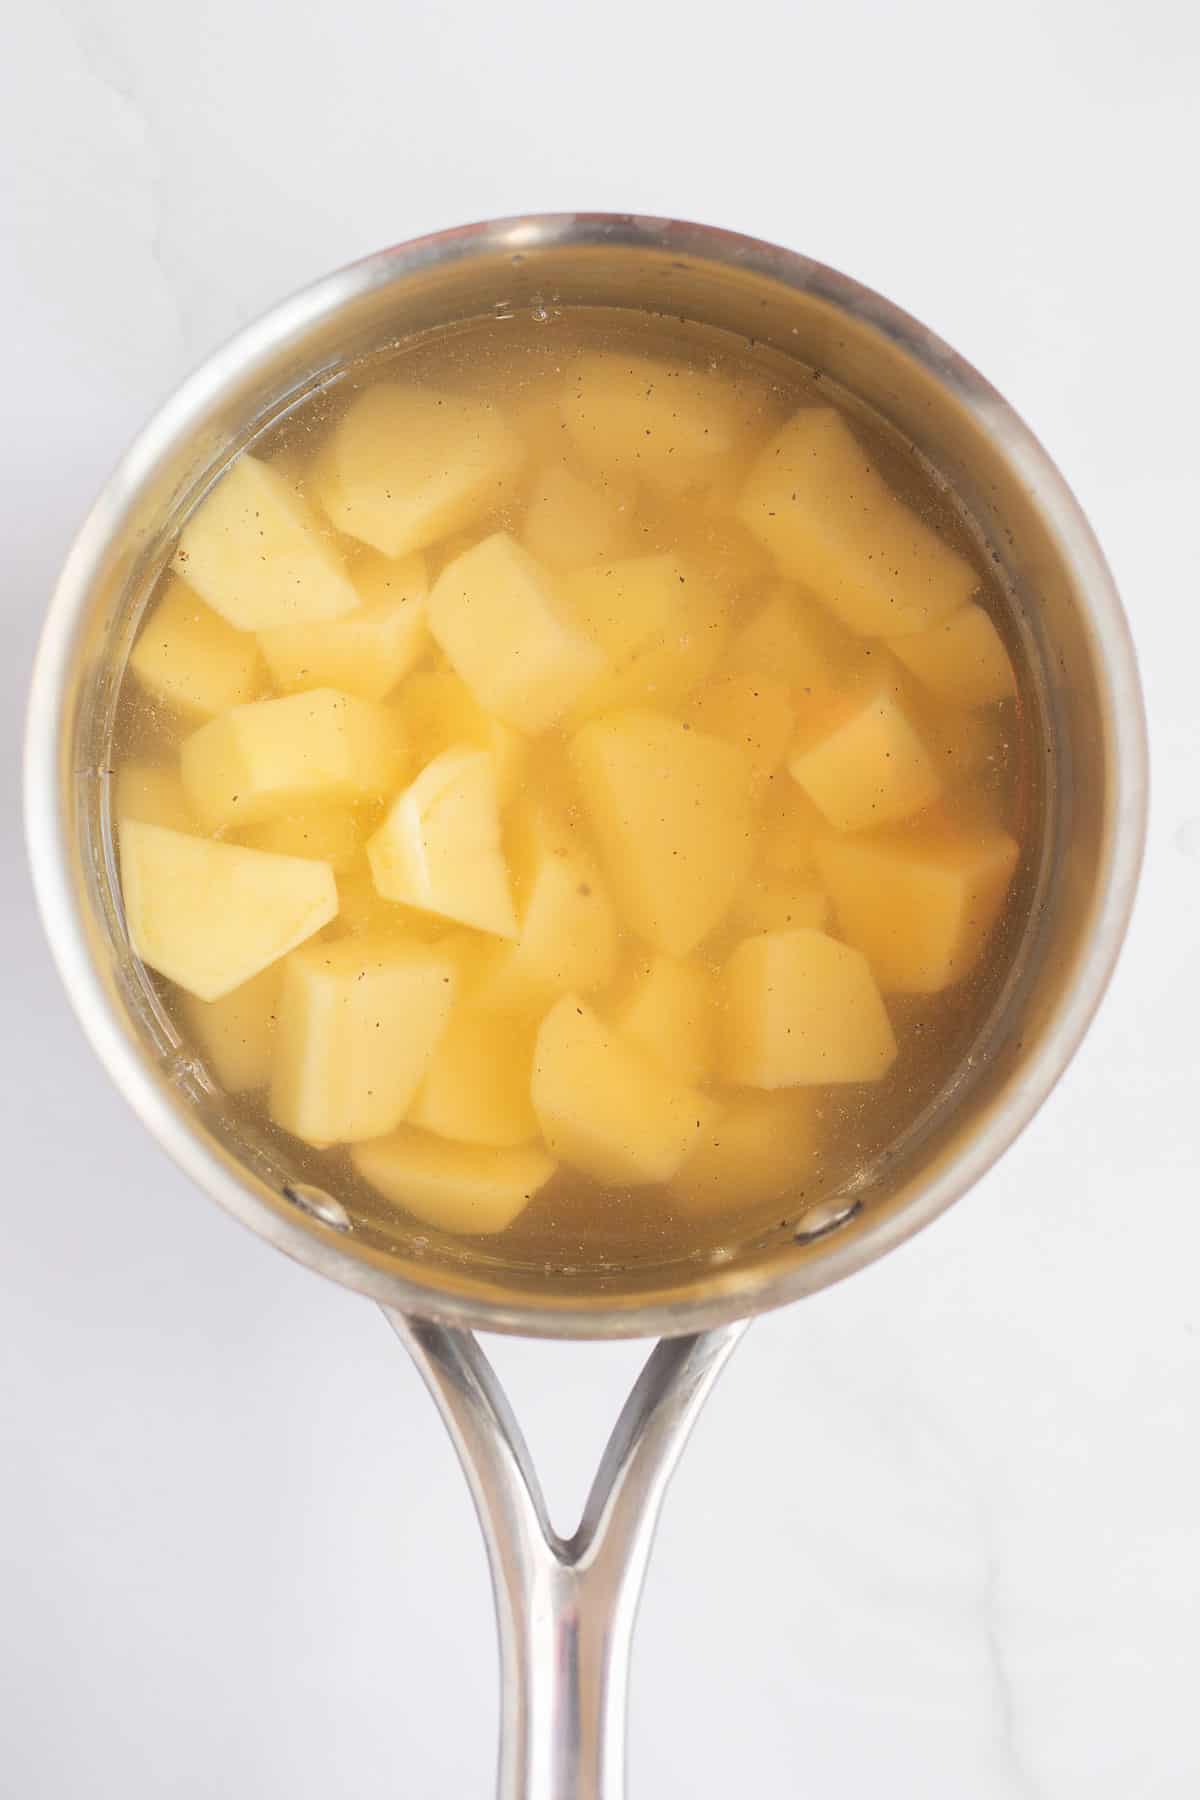 potato chunks in a silver pot of water.